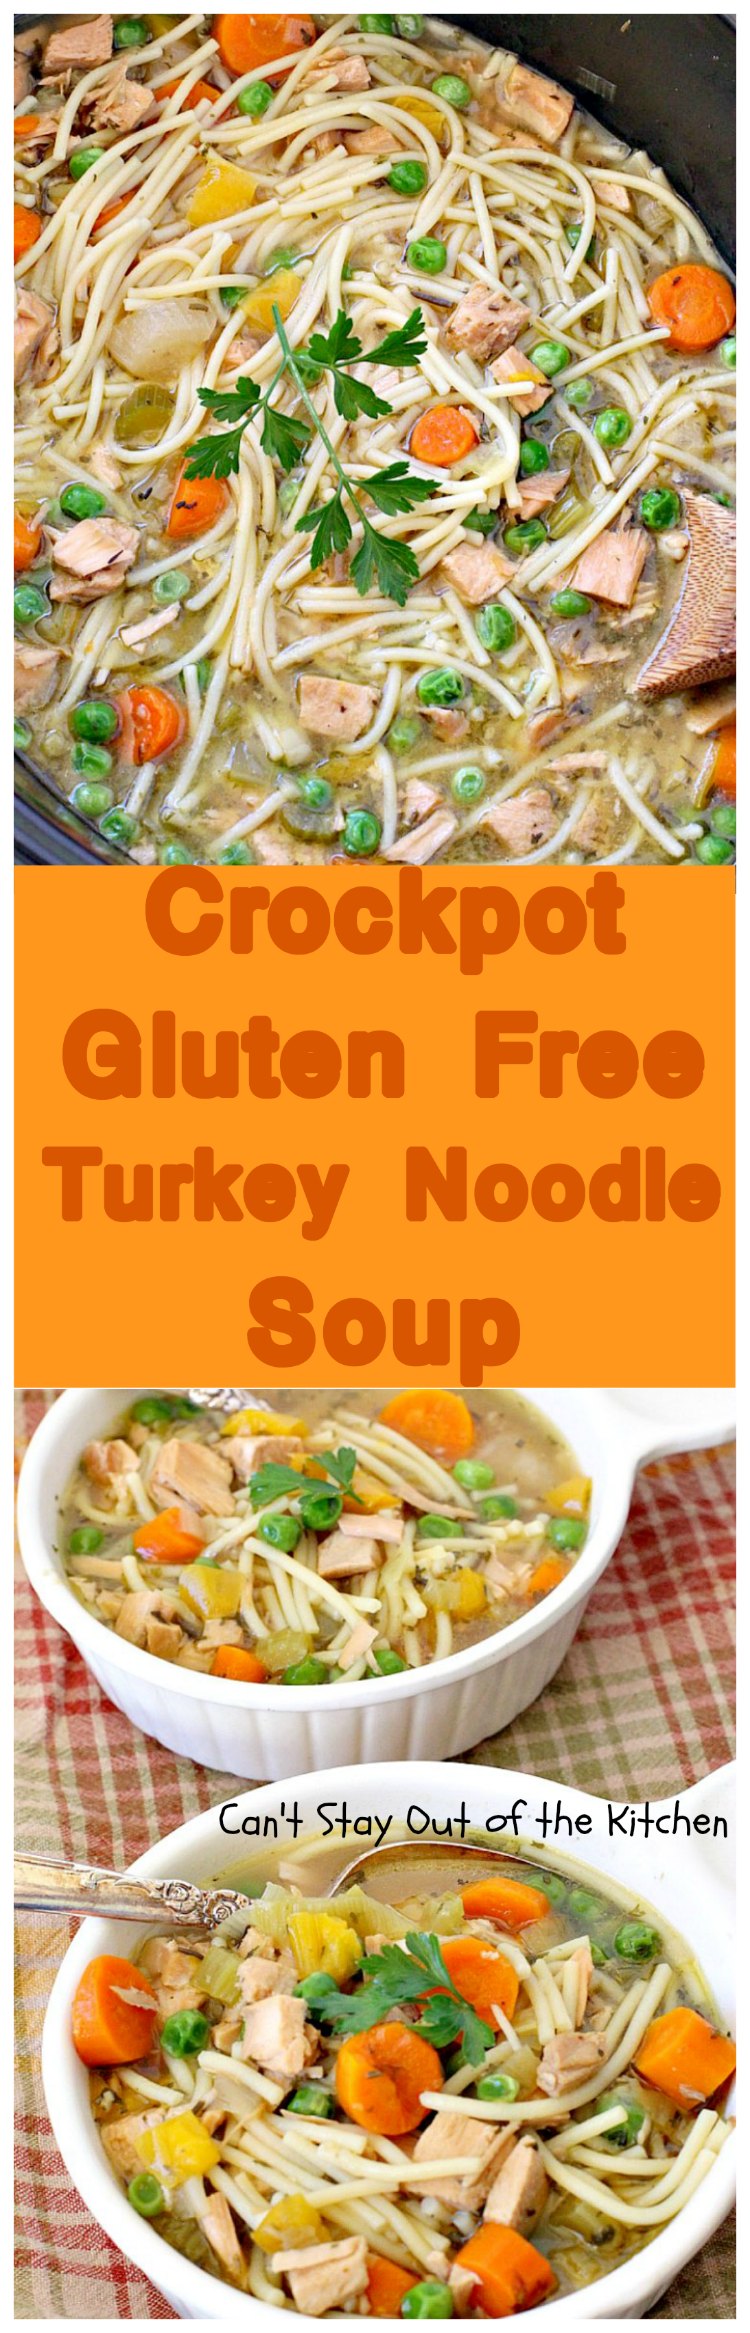 Crockpot Gluten Free Turkey Noodle Soup | Can't Stay Out of the Kitchen